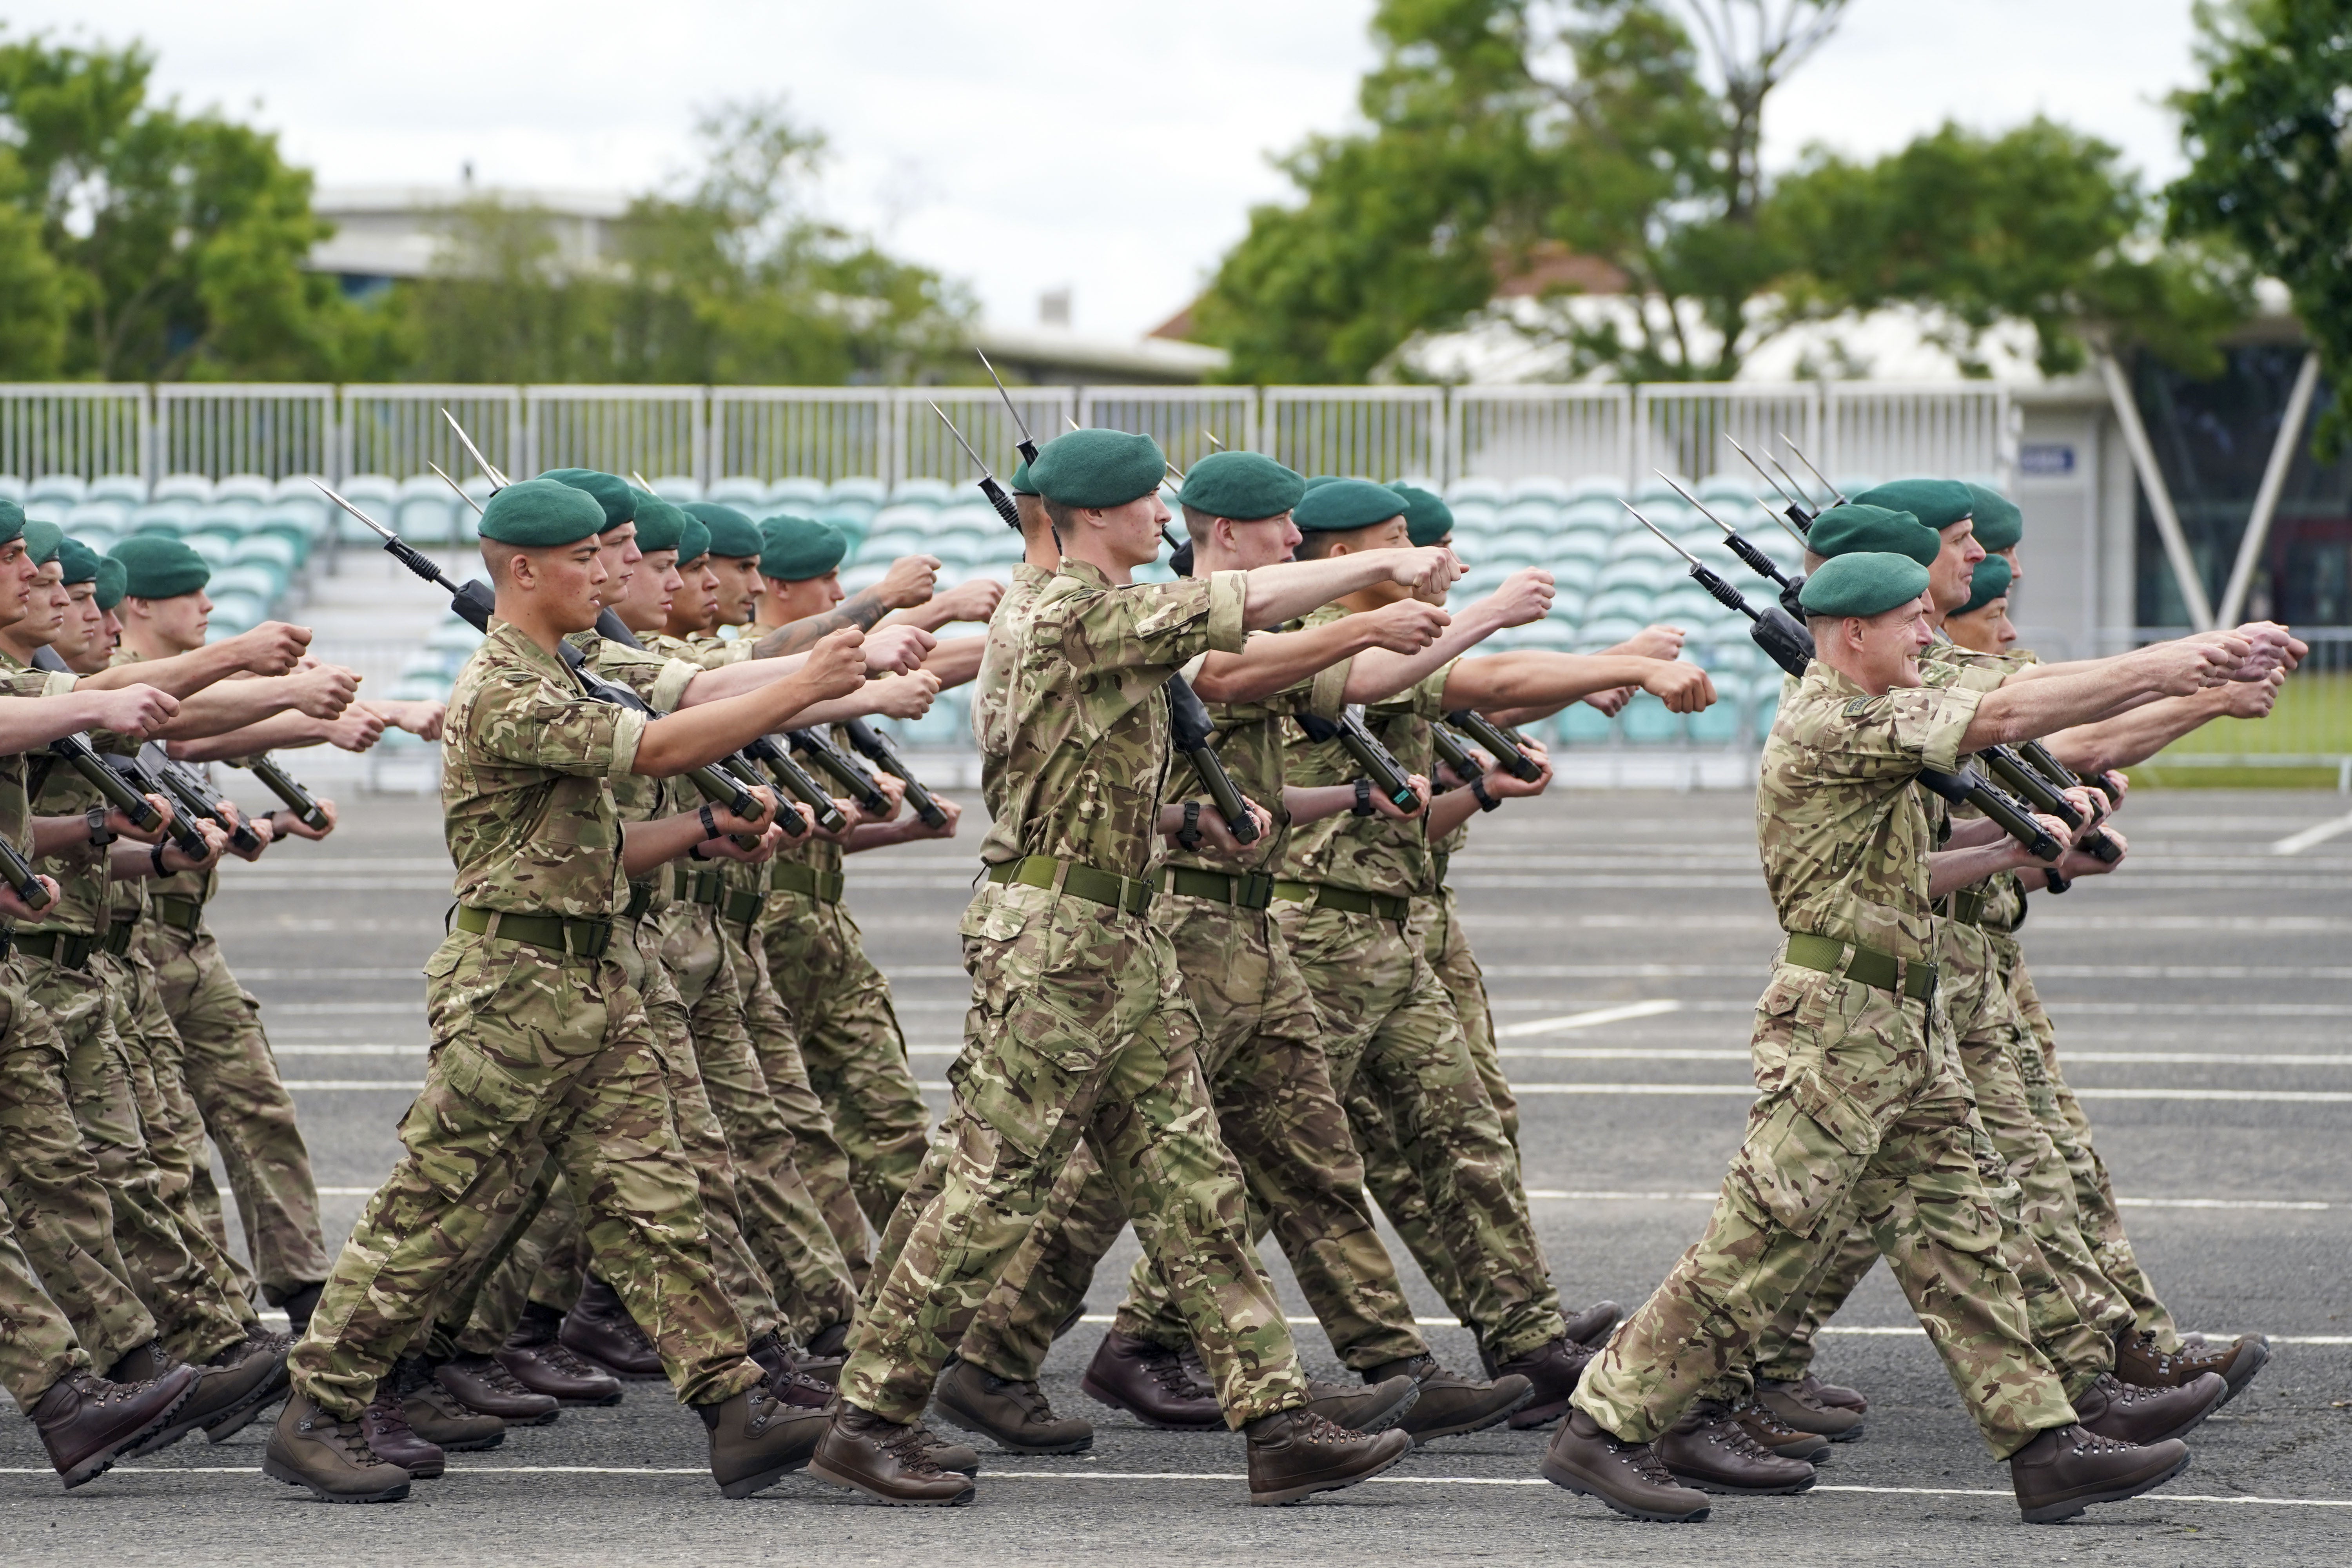 Royal Marines Commando personnel during the rehearsal (Steve Parsons/PA)